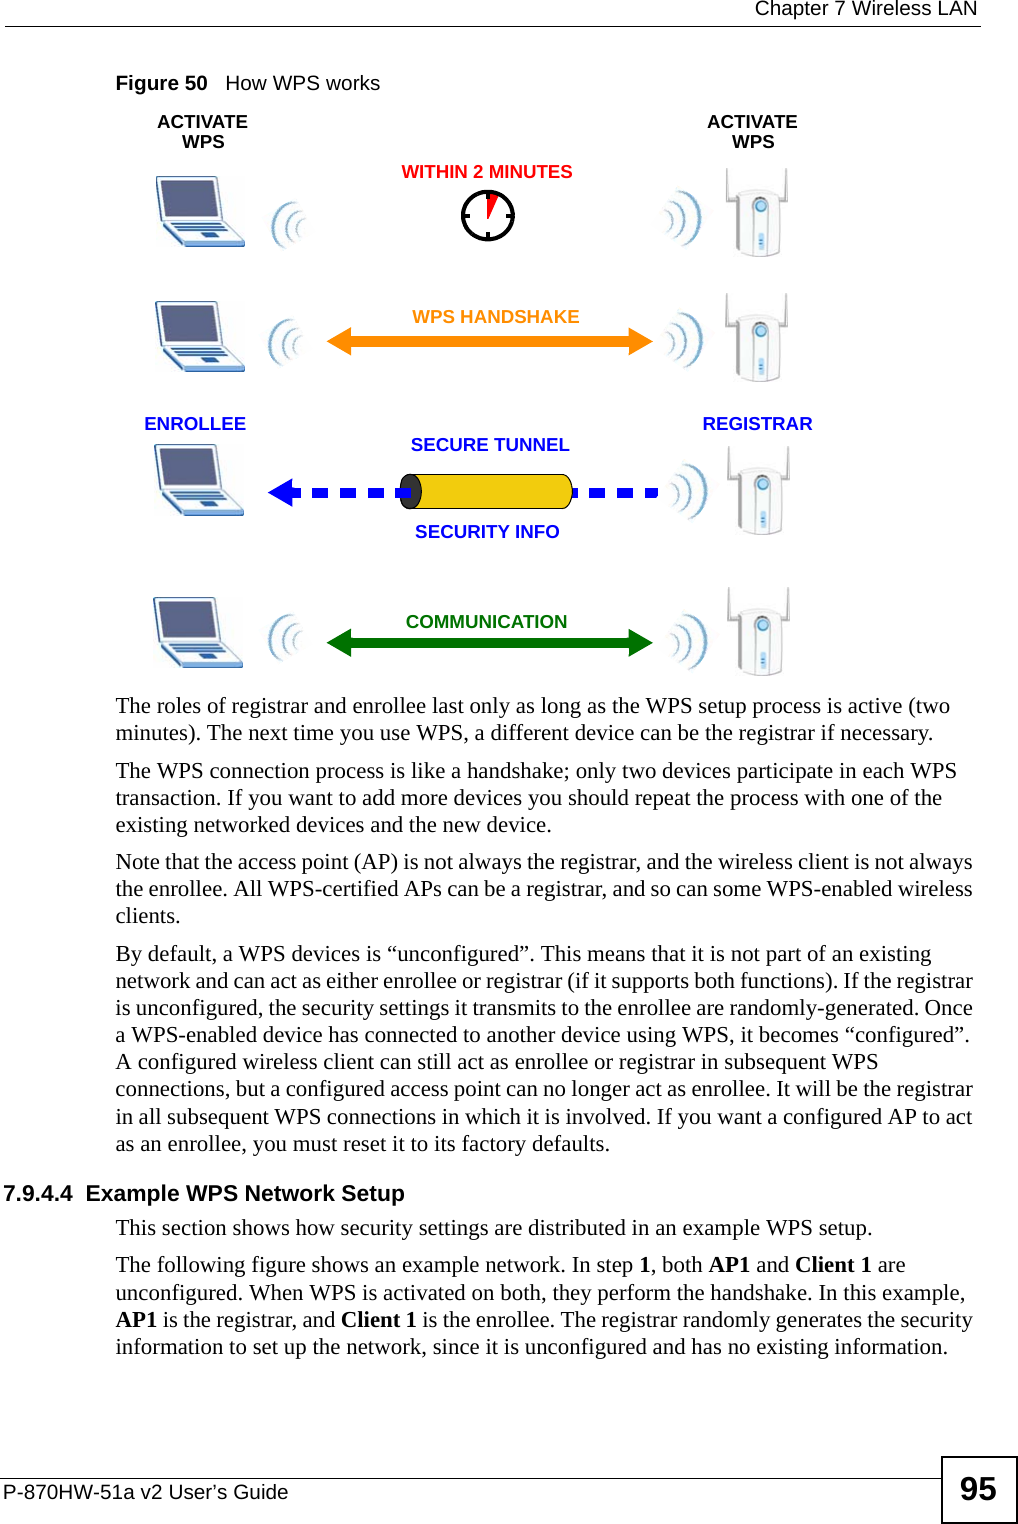  Chapter 7 Wireless LANP-870HW-51a v2 User’s Guide 95Figure 50   How WPS worksThe roles of registrar and enrollee last only as long as the WPS setup process is active (two minutes). The next time you use WPS, a different device can be the registrar if necessary.The WPS connection process is like a handshake; only two devices participate in each WPS transaction. If you want to add more devices you should repeat the process with one of the existing networked devices and the new device.Note that the access point (AP) is not always the registrar, and the wireless client is not always the enrollee. All WPS-certified APs can be a registrar, and so can some WPS-enabled wireless clients.By default, a WPS devices is “unconfigured”. This means that it is not part of an existing network and can act as either enrollee or registrar (if it supports both functions). If the registrar is unconfigured, the security settings it transmits to the enrollee are randomly-generated. Once a WPS-enabled device has connected to another device using WPS, it becomes “configured”. A configured wireless client can still act as enrollee or registrar in subsequent WPS connections, but a configured access point can no longer act as enrollee. It will be the registrar in all subsequent WPS connections in which it is involved. If you want a configured AP to act as an enrollee, you must reset it to its factory defaults.7.9.4.4  Example WPS Network SetupThis section shows how security settings are distributed in an example WPS setup.The following figure shows an example network. In step 1, both AP1 and Client 1 are unconfigured. When WPS is activated on both, they perform the handshake. In this example, AP1 is the registrar, and Client 1 is the enrollee. The registrar randomly generates the security information to set up the network, since it is unconfigured and has no existing information.SECURE TUNNELSECURITY INFOWITHIN 2 MINUTESCOMMUNICATIONACTIVATEWPSACTIVATEWPSWPS HANDSHAKEREGISTRARENROLLEE